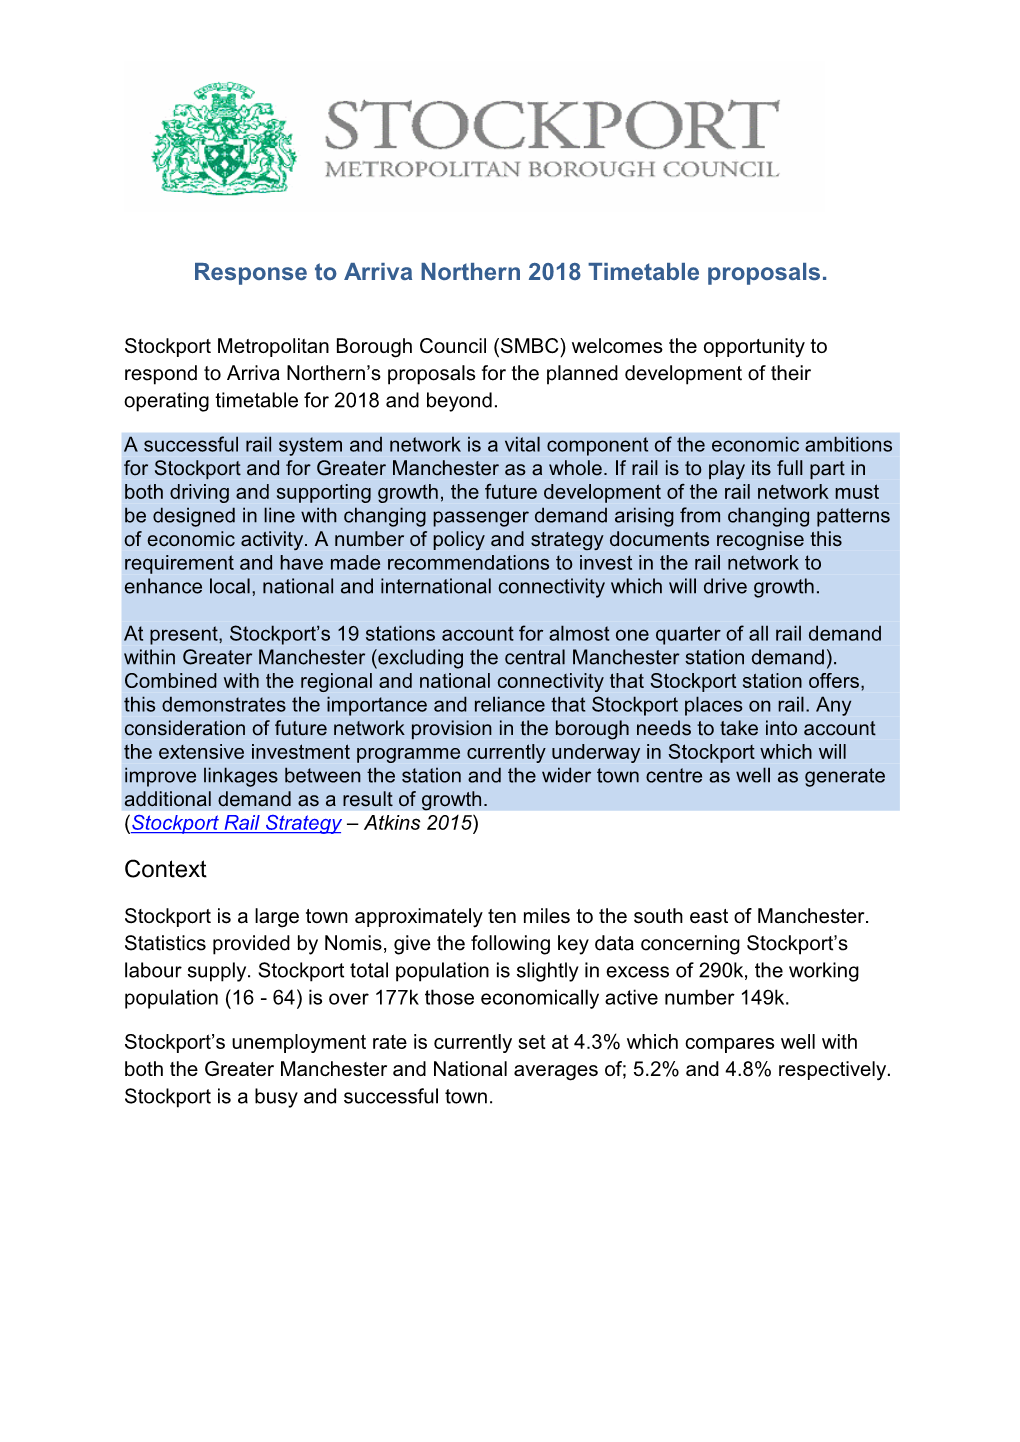 Response to Arriva Northern 2018 Timetable Proposals. Context